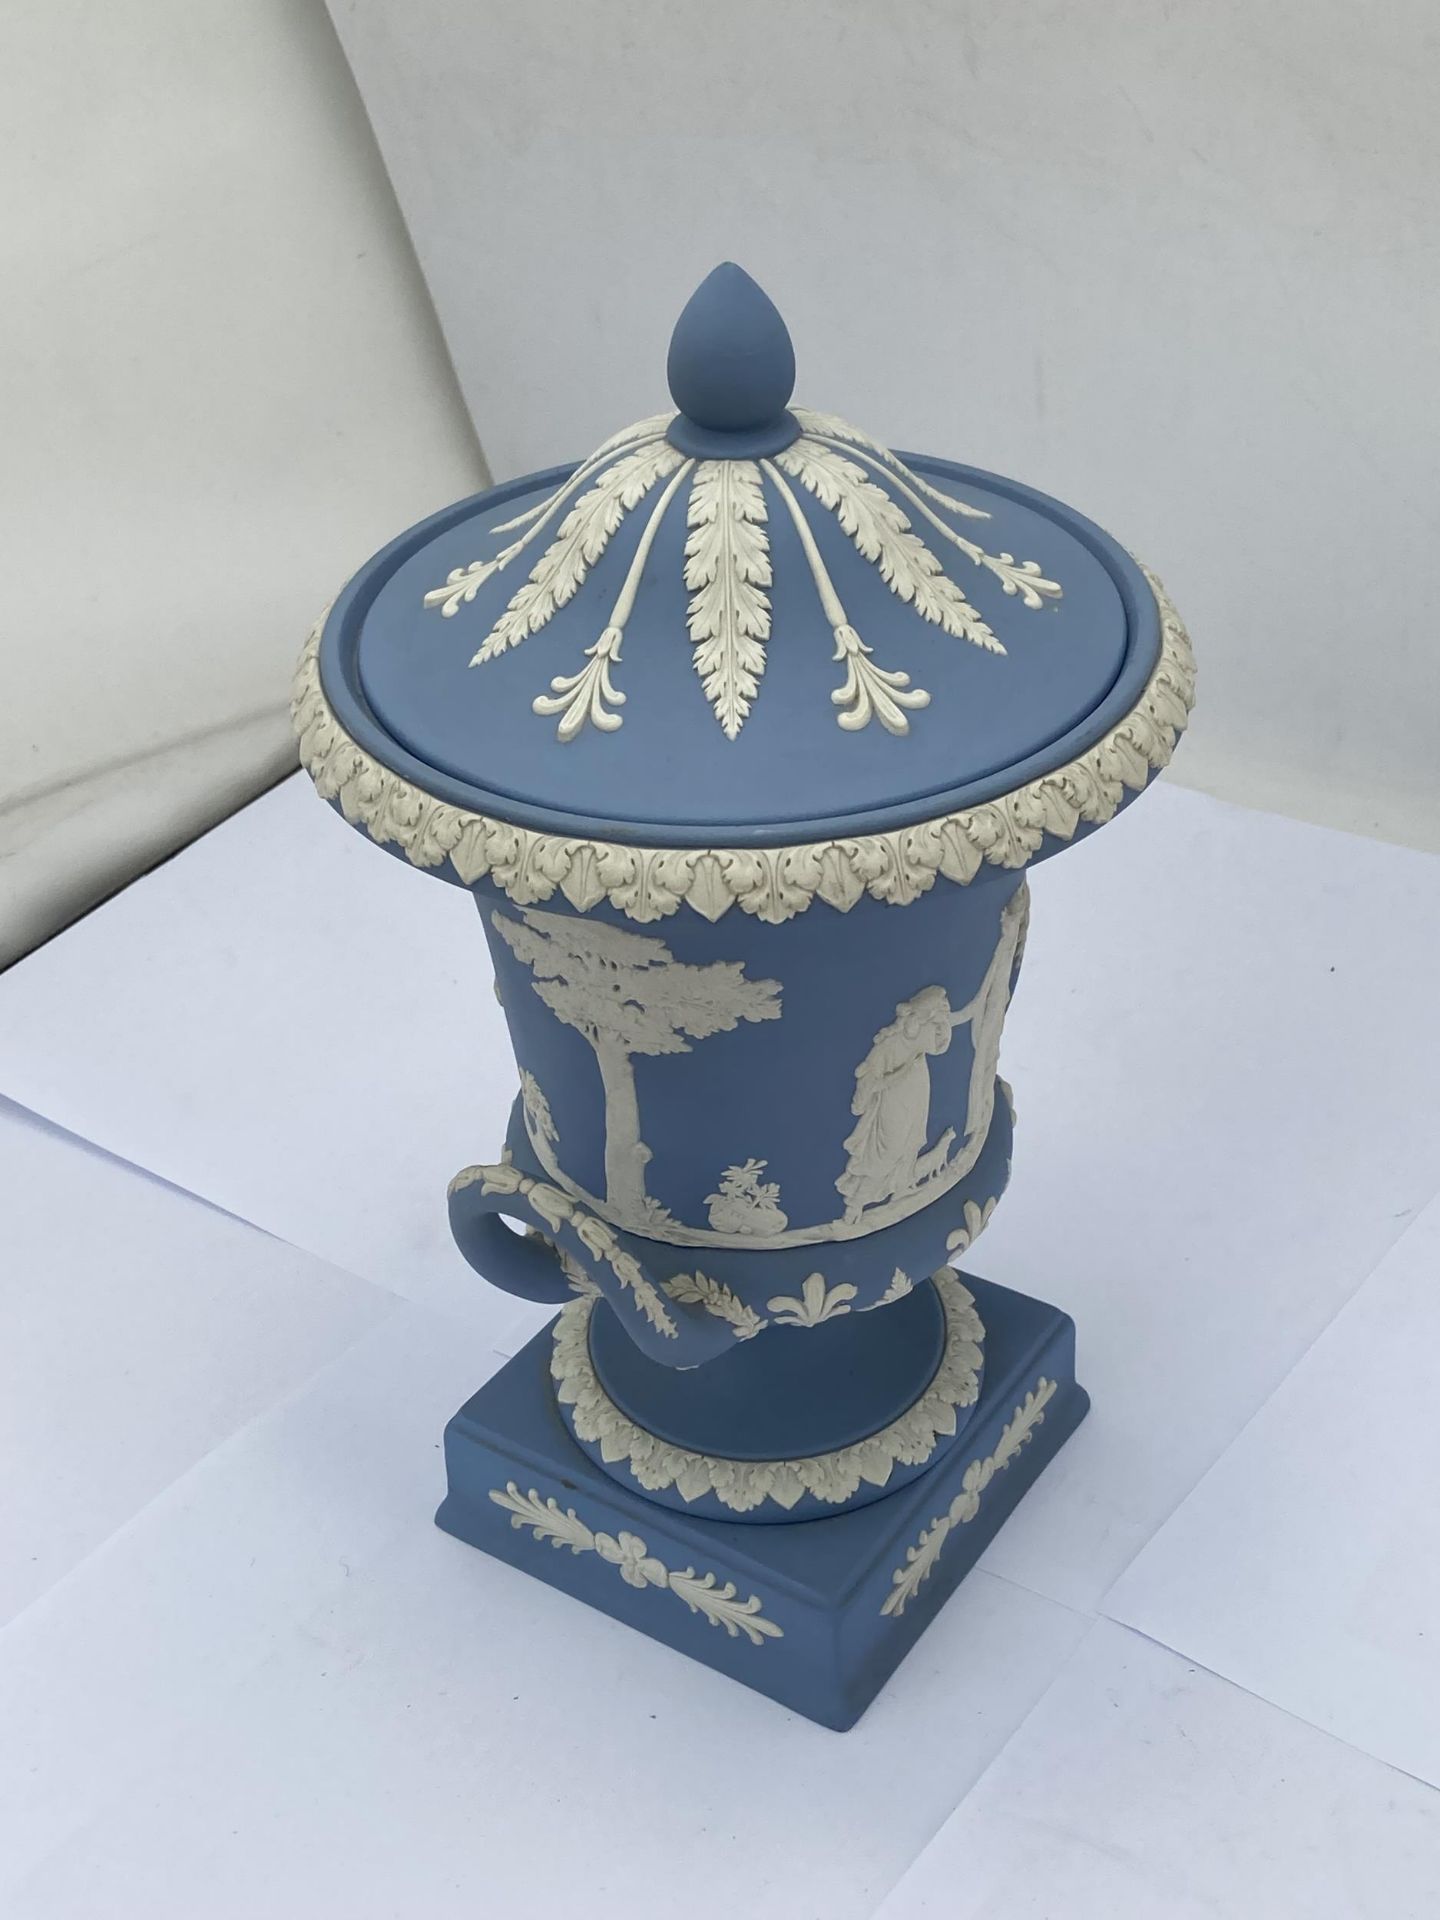 A WEDGWOOD PALE BLUE JASPERWARE PEDESTAL VASE / URN AND COVER OF CAMPANA FORM - Image 3 of 5